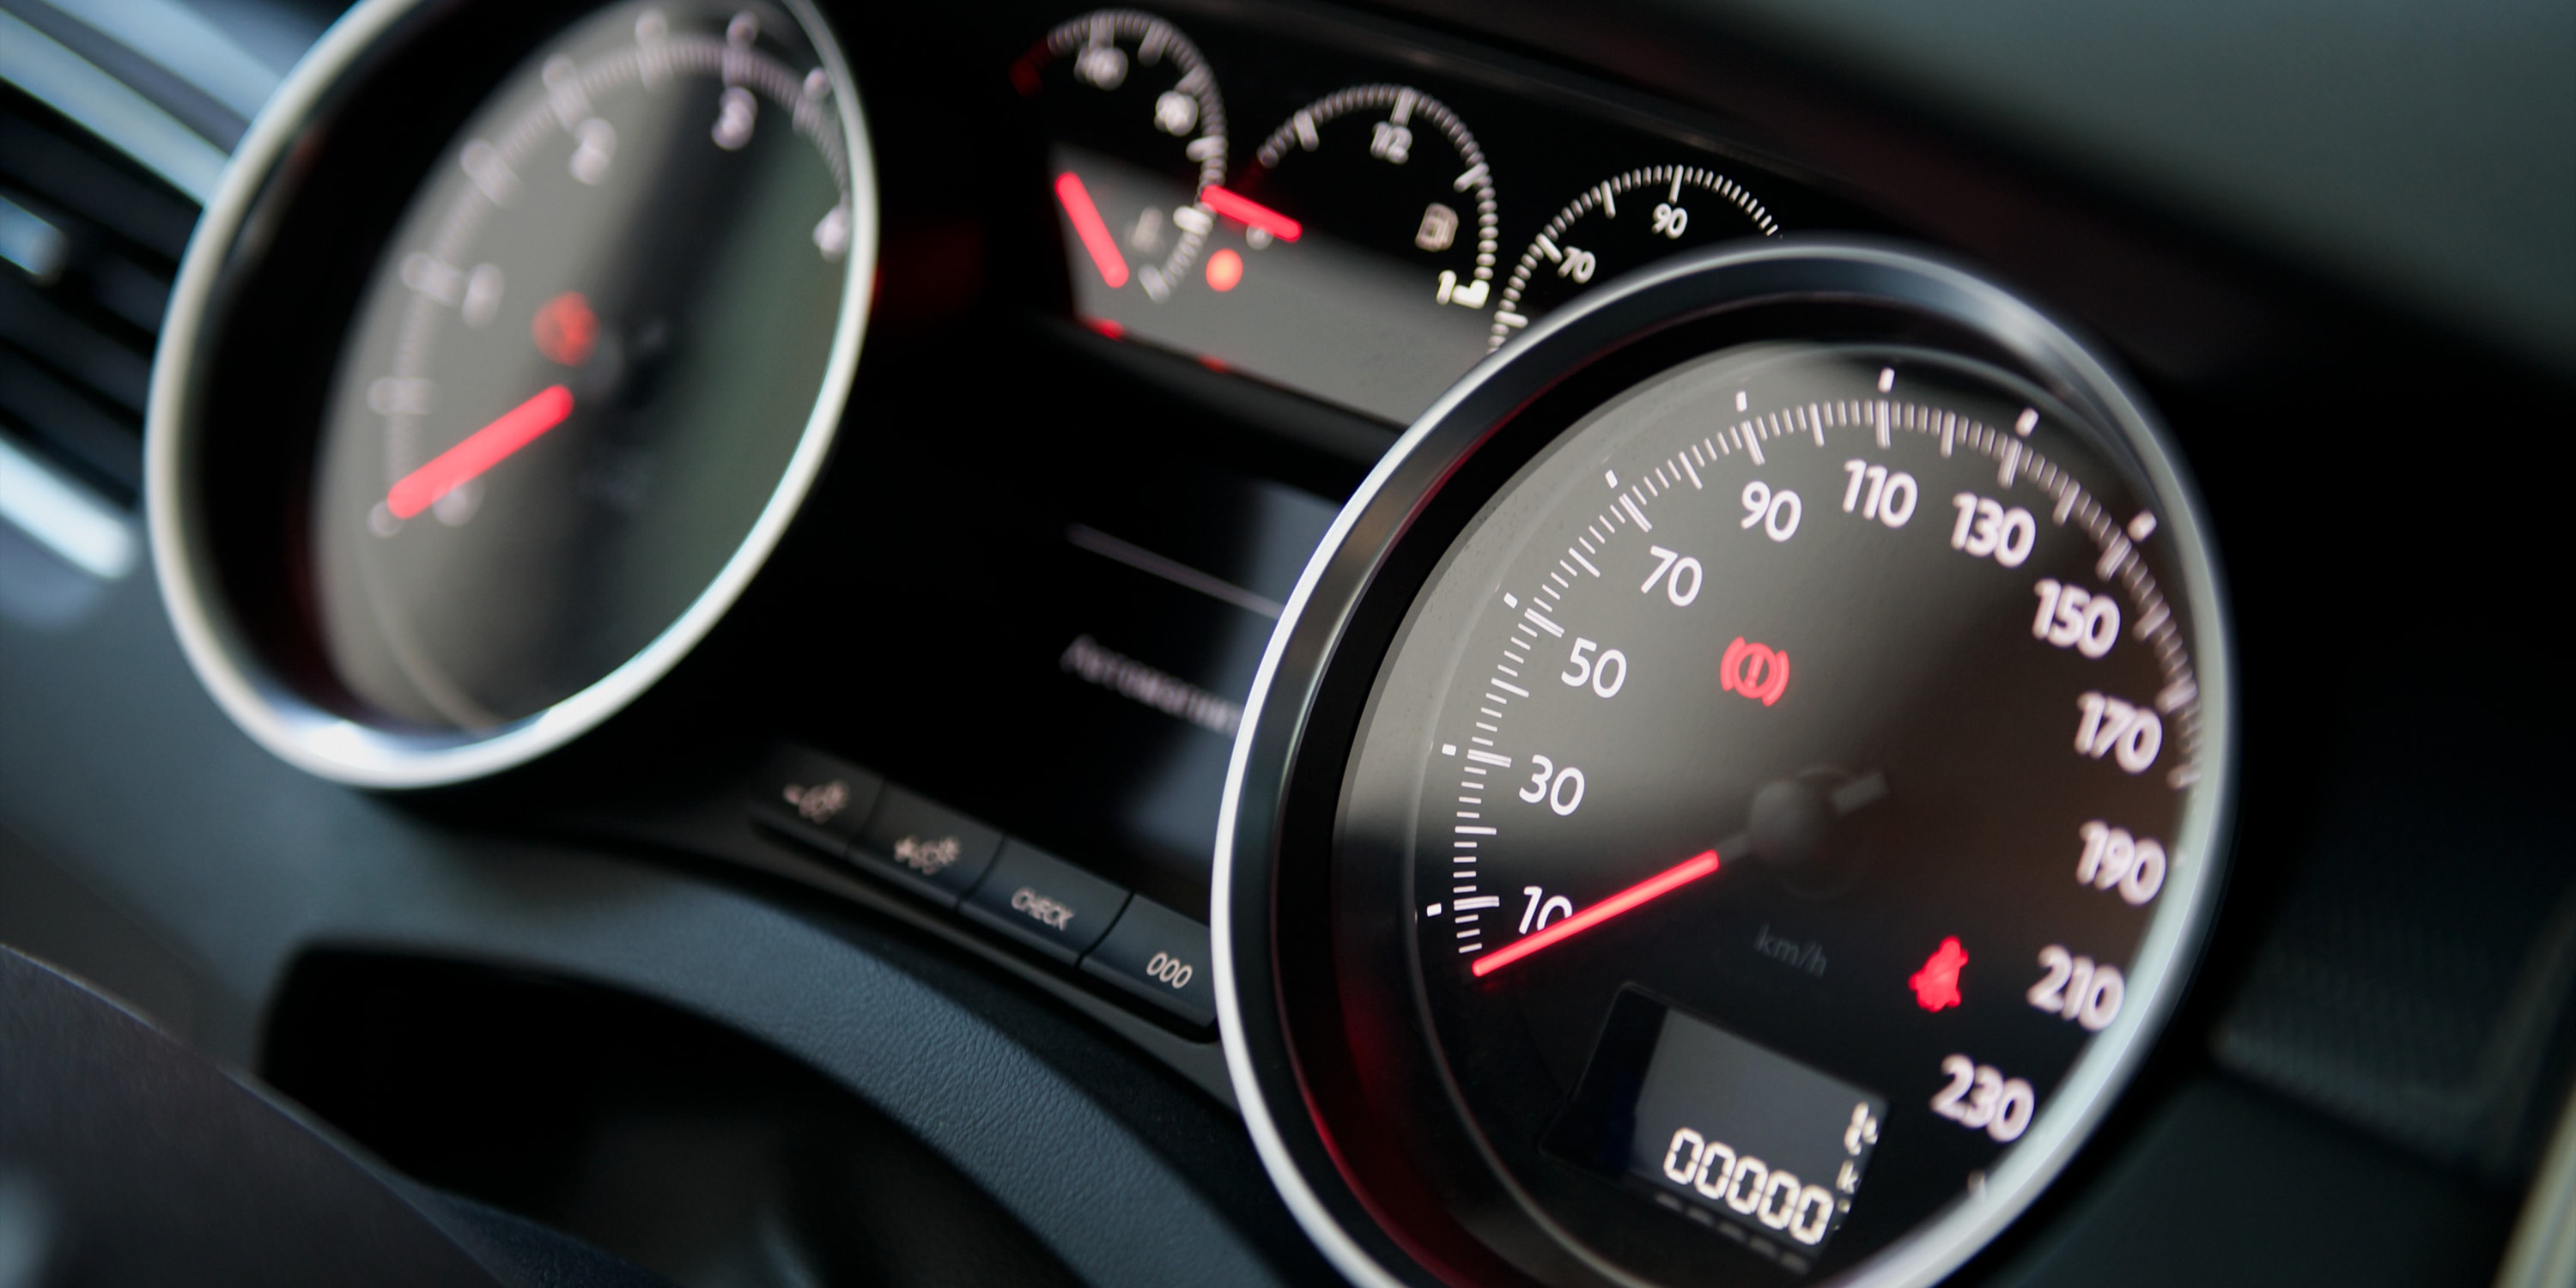 VW dashboard warning lights – what they mean